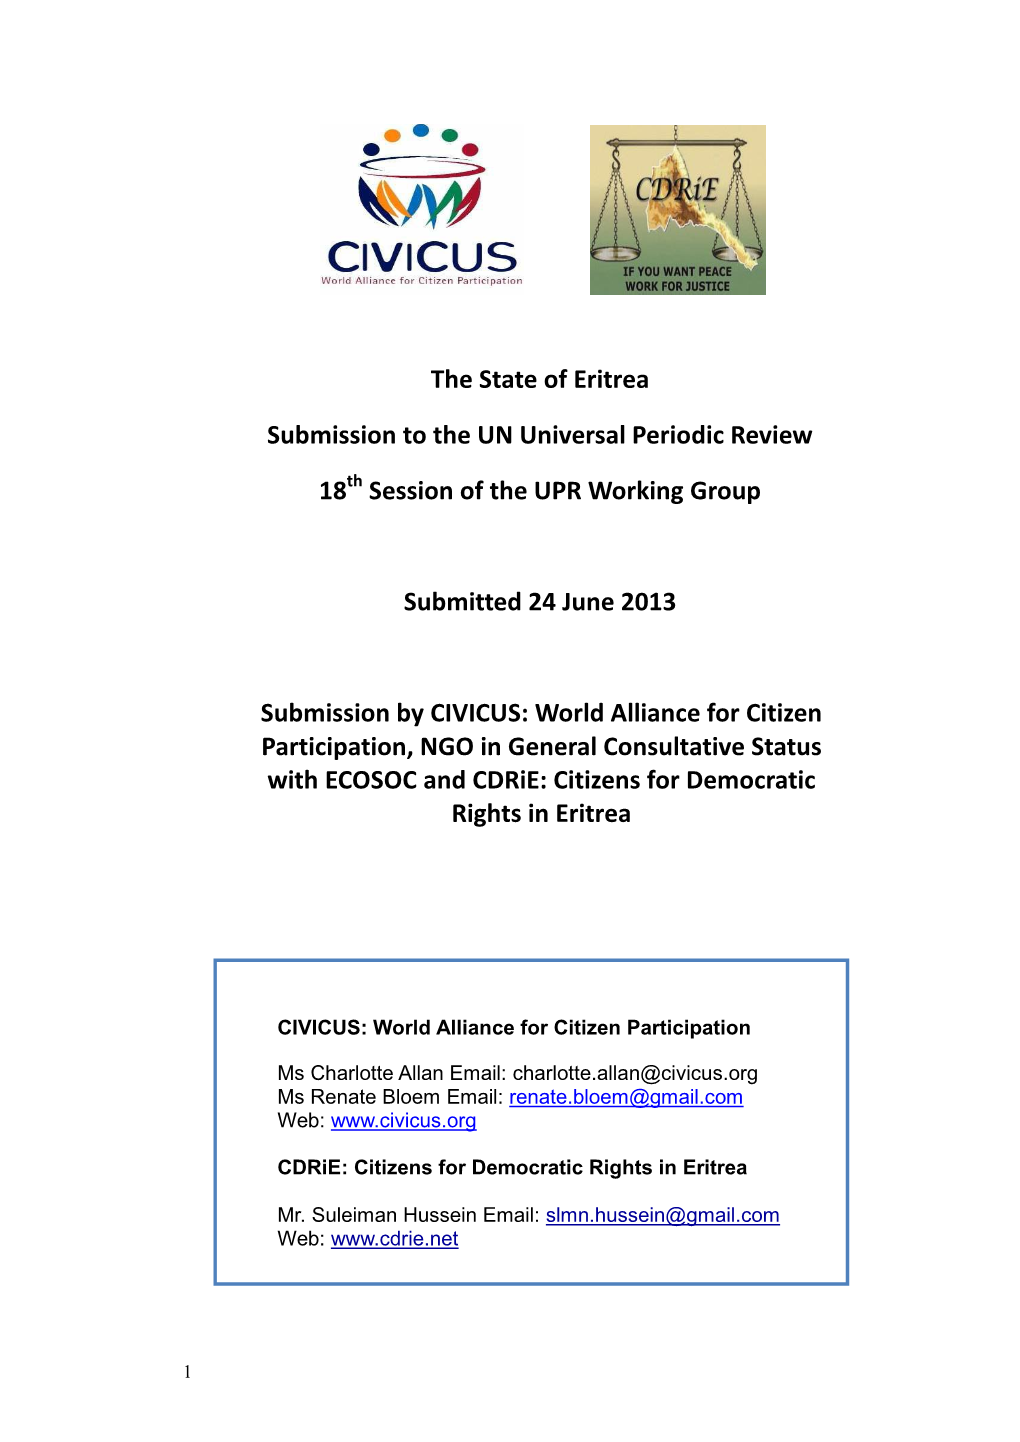 The State of Eritrea Submission to the UN Universal Periodic Review 18